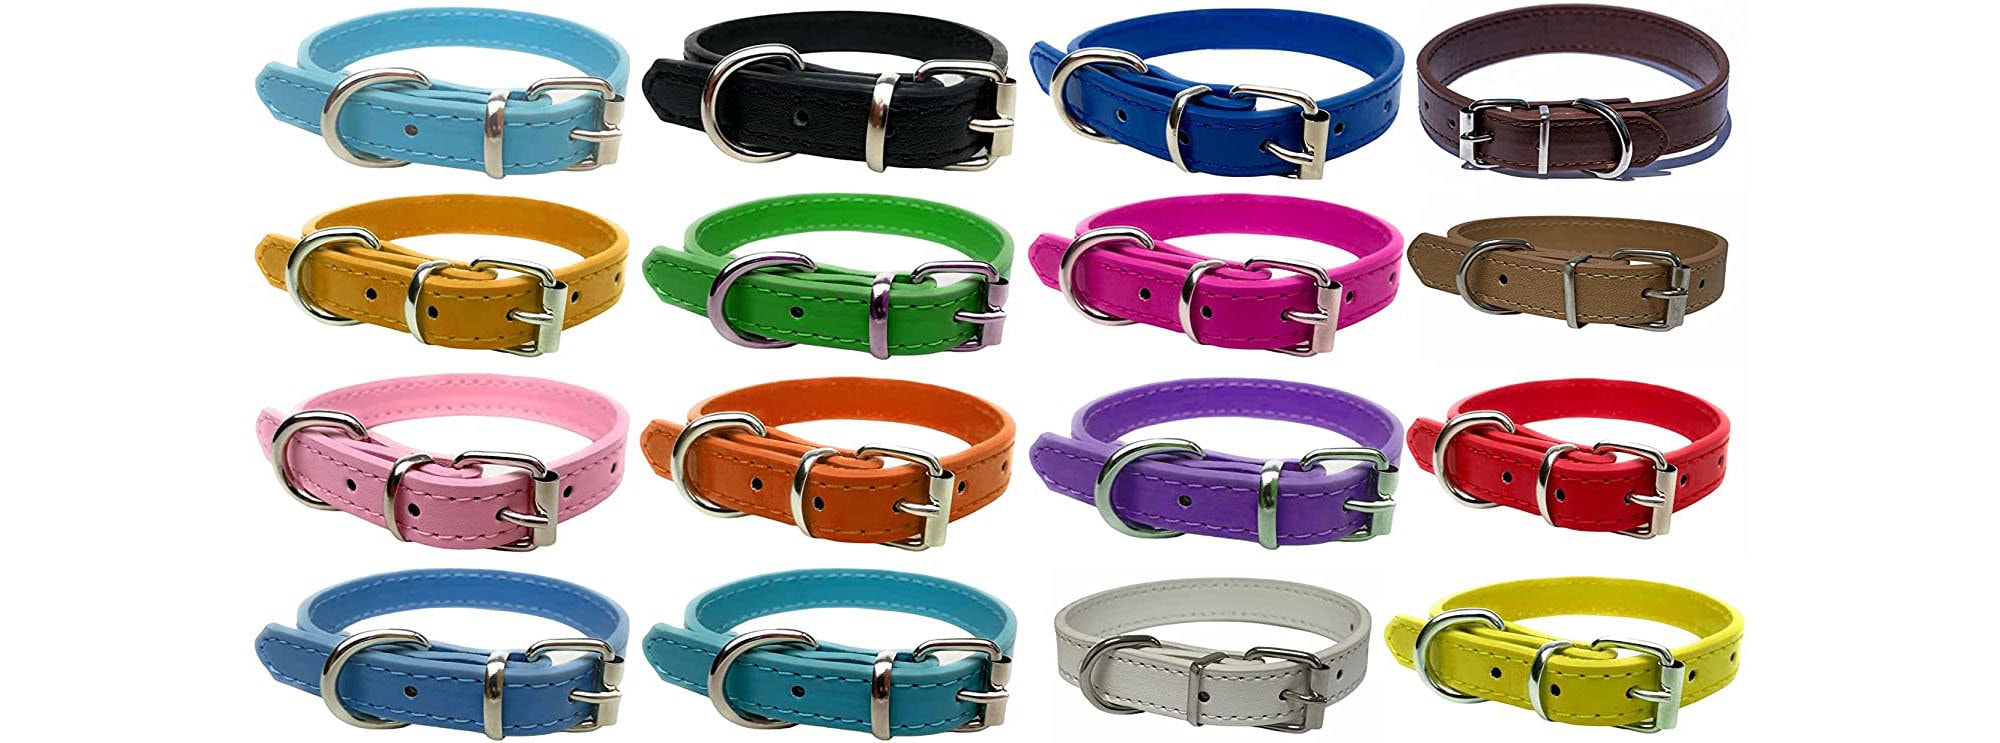 Strong Leather Dog Collar for Puppy, Cat, Dogs for Small, Medium, Large &  Extra Large Pet Collars Range of Colours and Sizes 